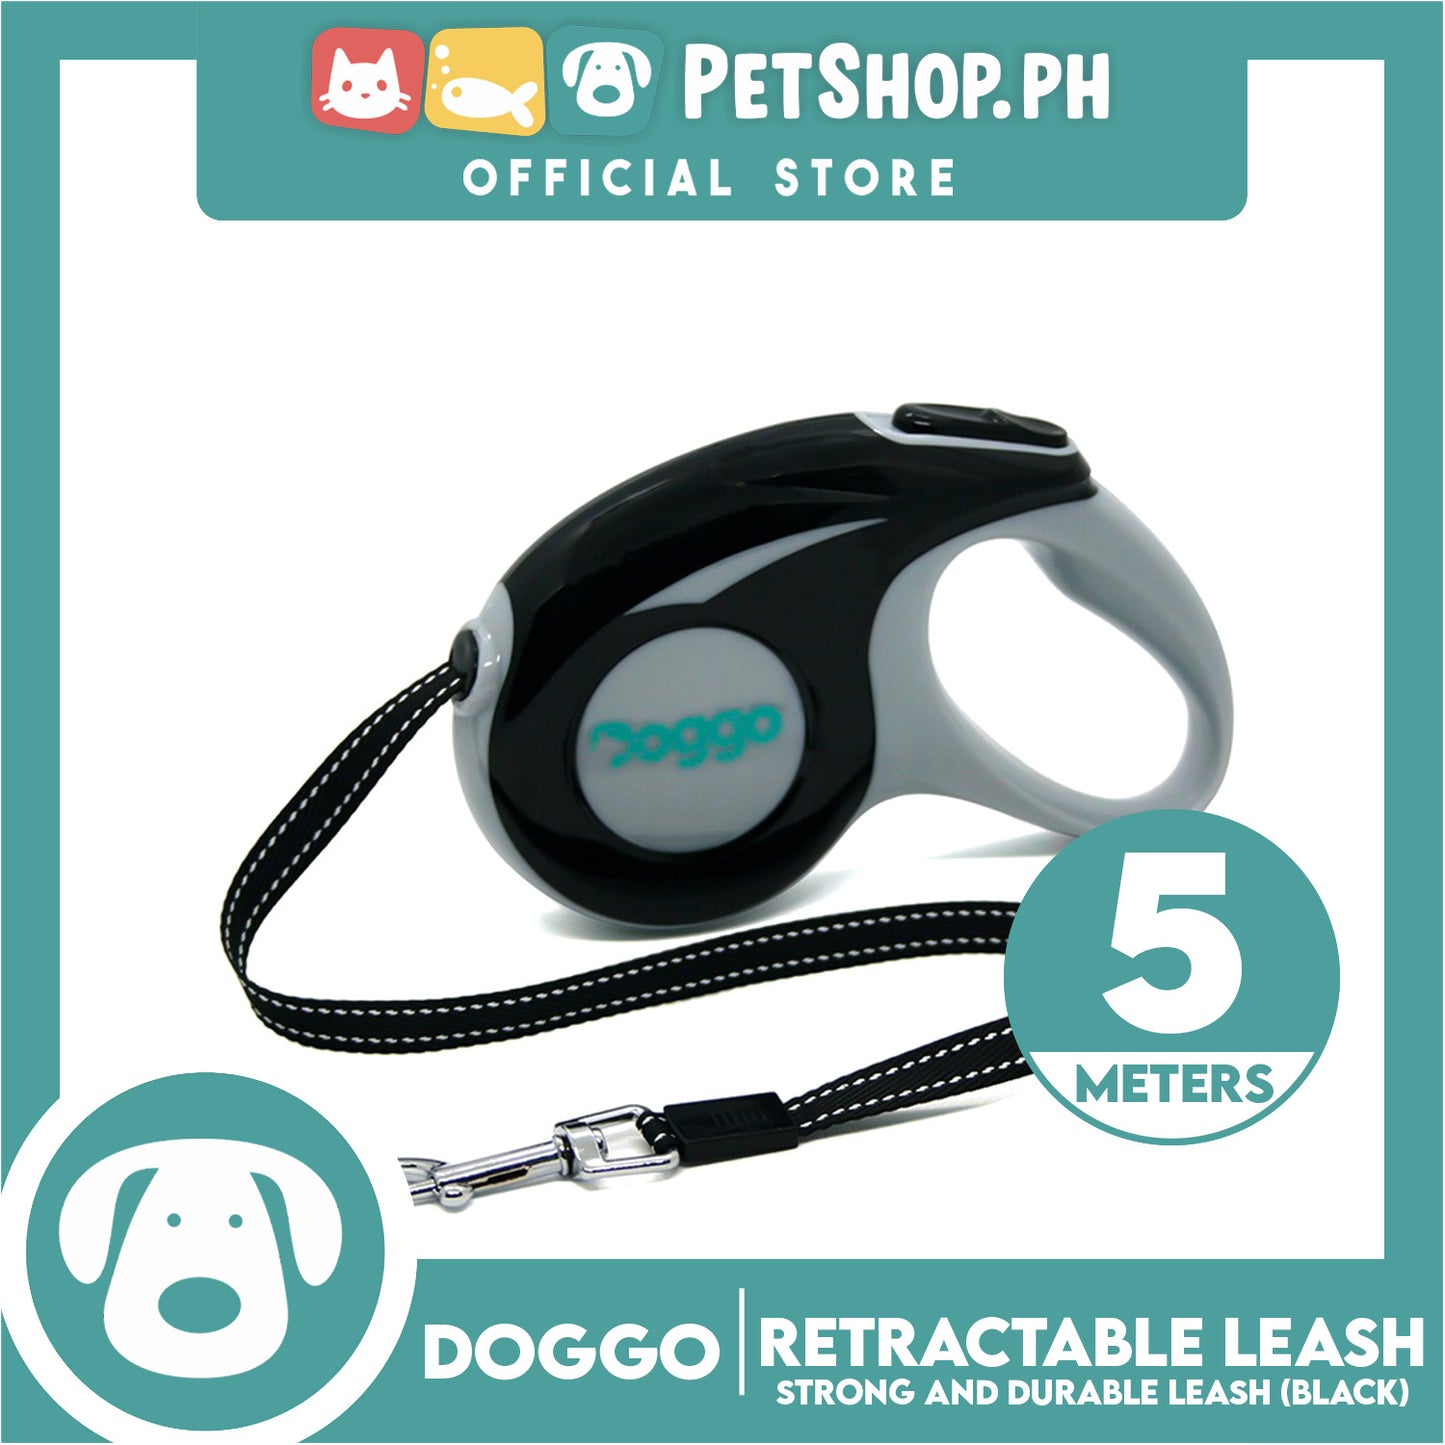 Doggo Retractable Leash 5M (Black) Strong And Durable, In Comfort And Control Running And Convenient